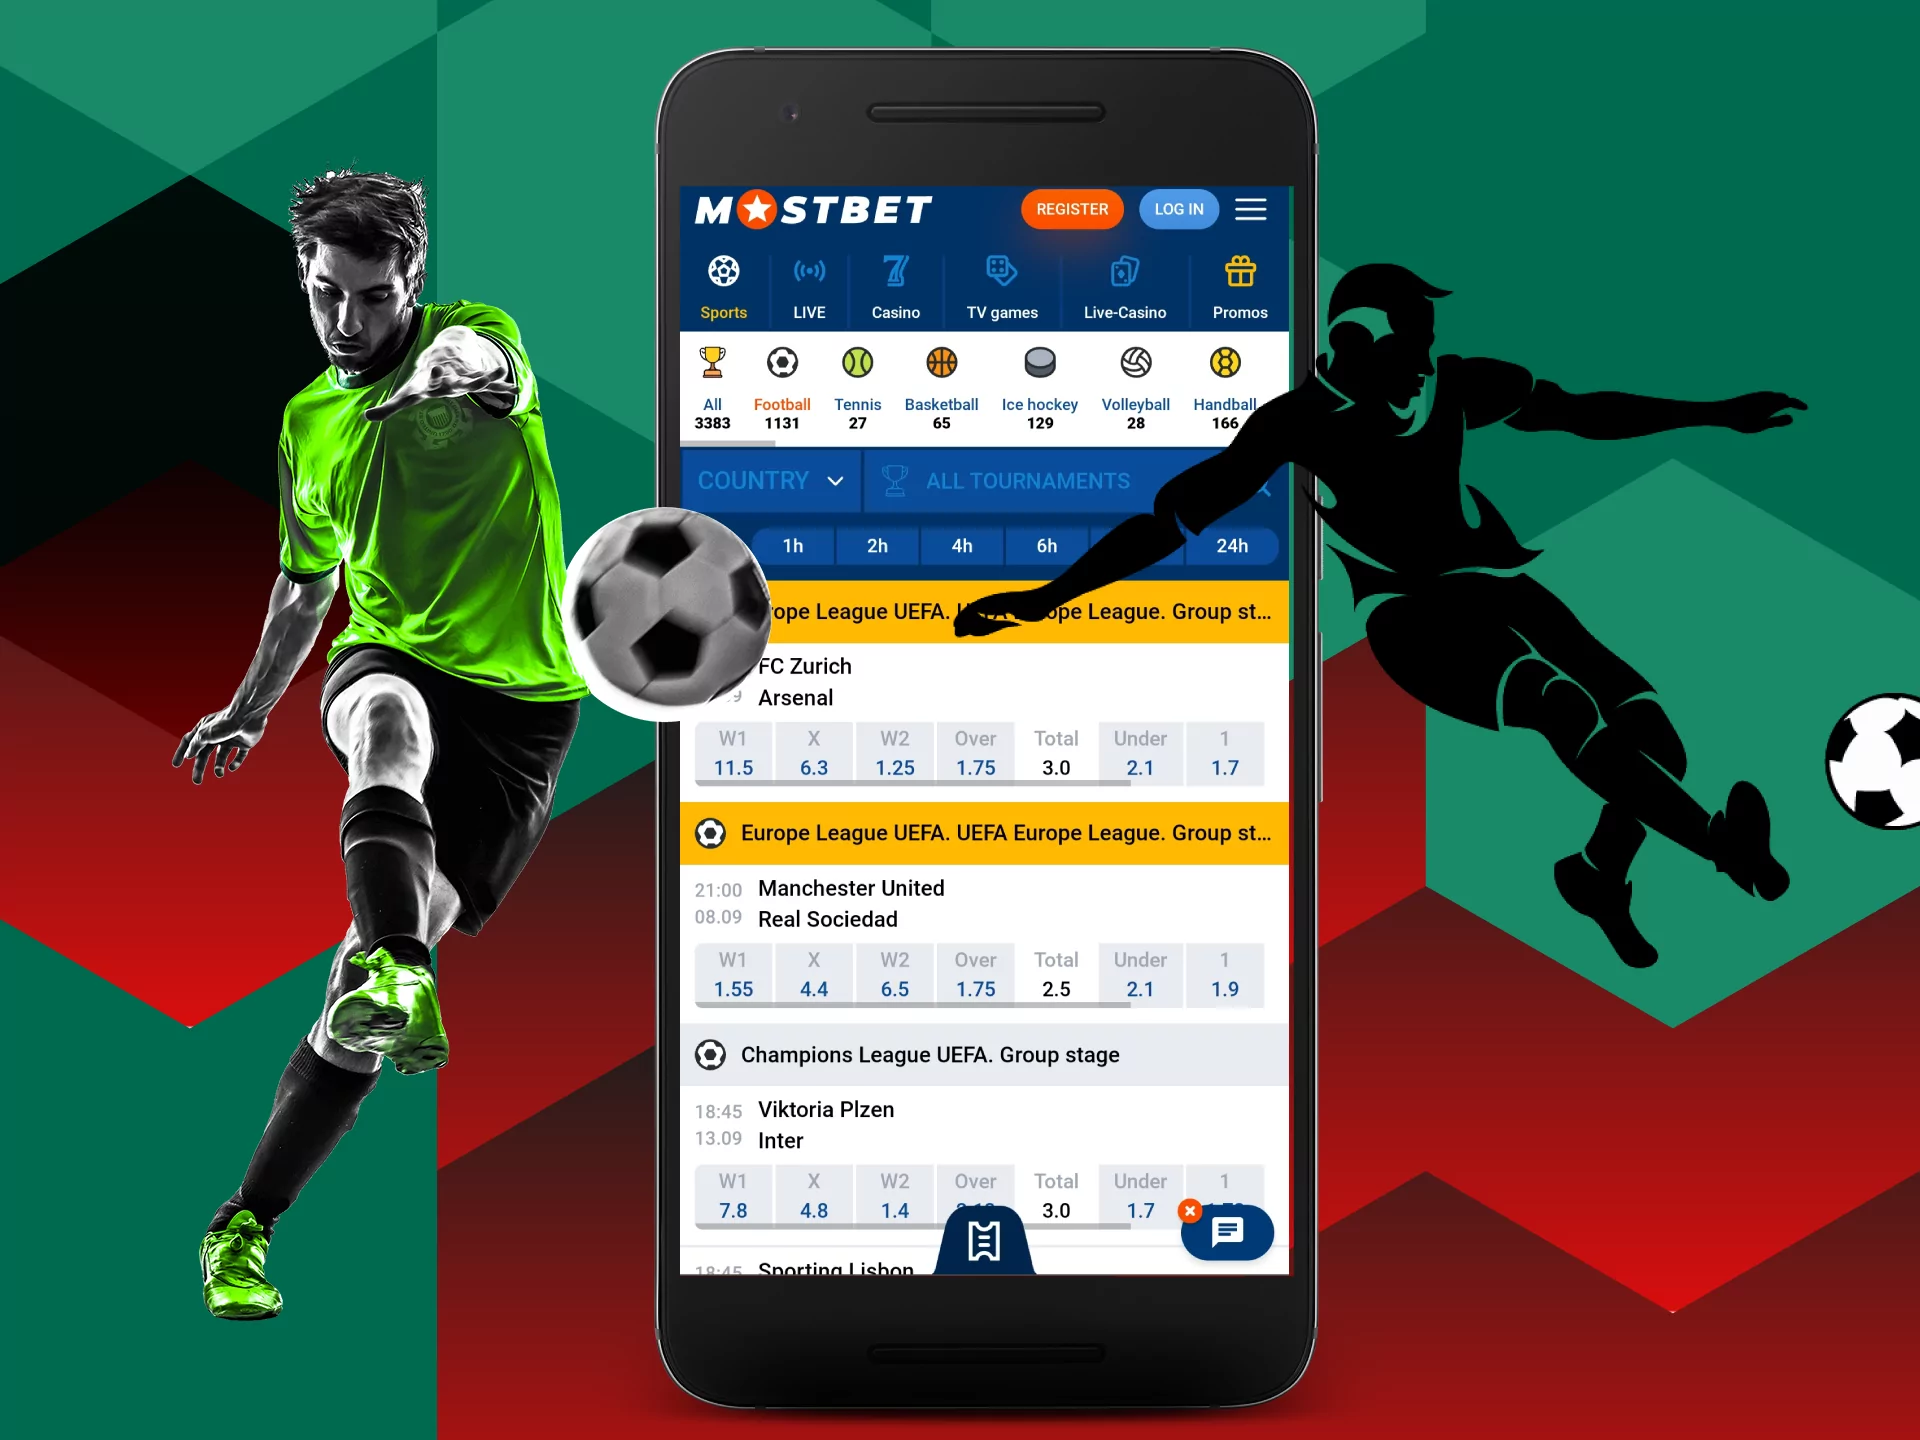 Place bets on the fantasy sports at Mostbet.